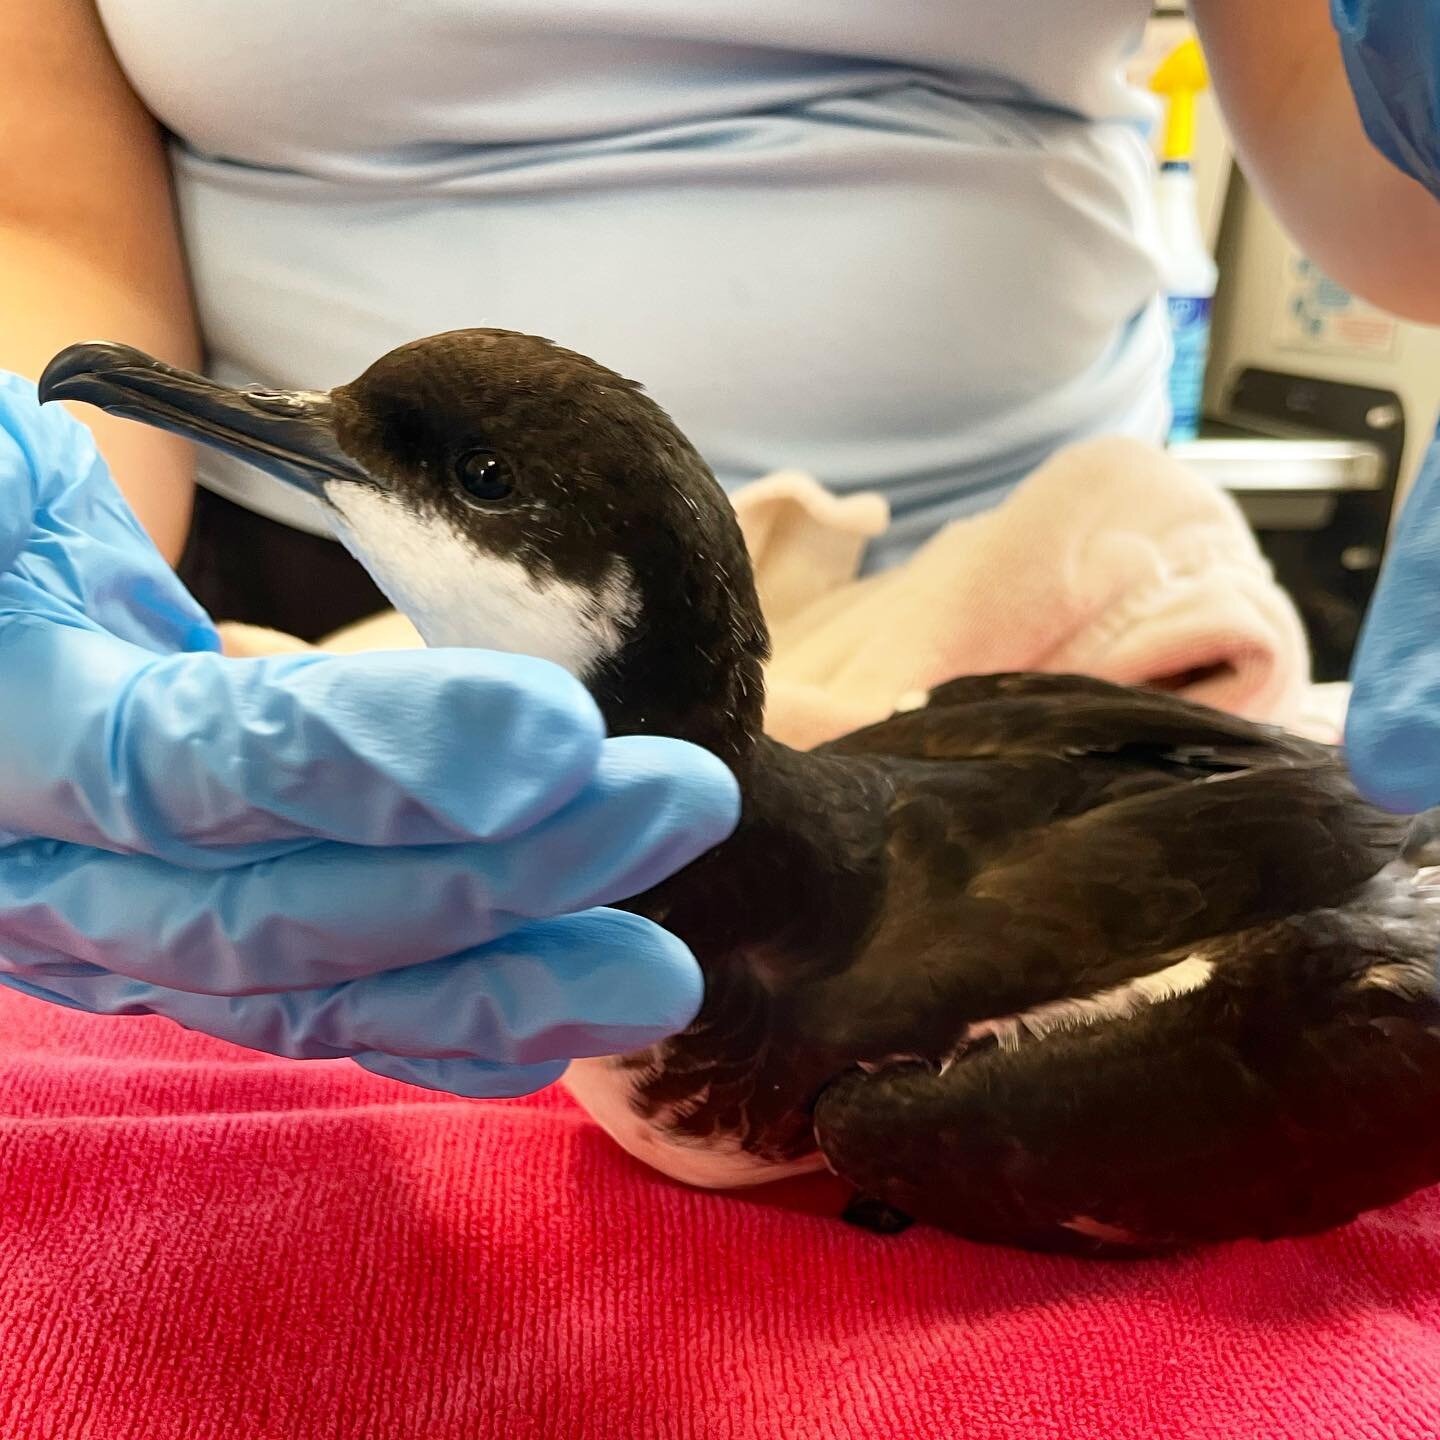 And the answer to Sunday&rsquo;s post is&hellip;. Newell&rsquo;s Shearwater / &lsquo;A&lsquo;o! Did you guess correctly?? 😄 
&bull;
&bull;
&bull;
#saveourshearwaters #wildlifeconservation #wildliferehab #kauai #hawaii #conservation #wildliferescue #